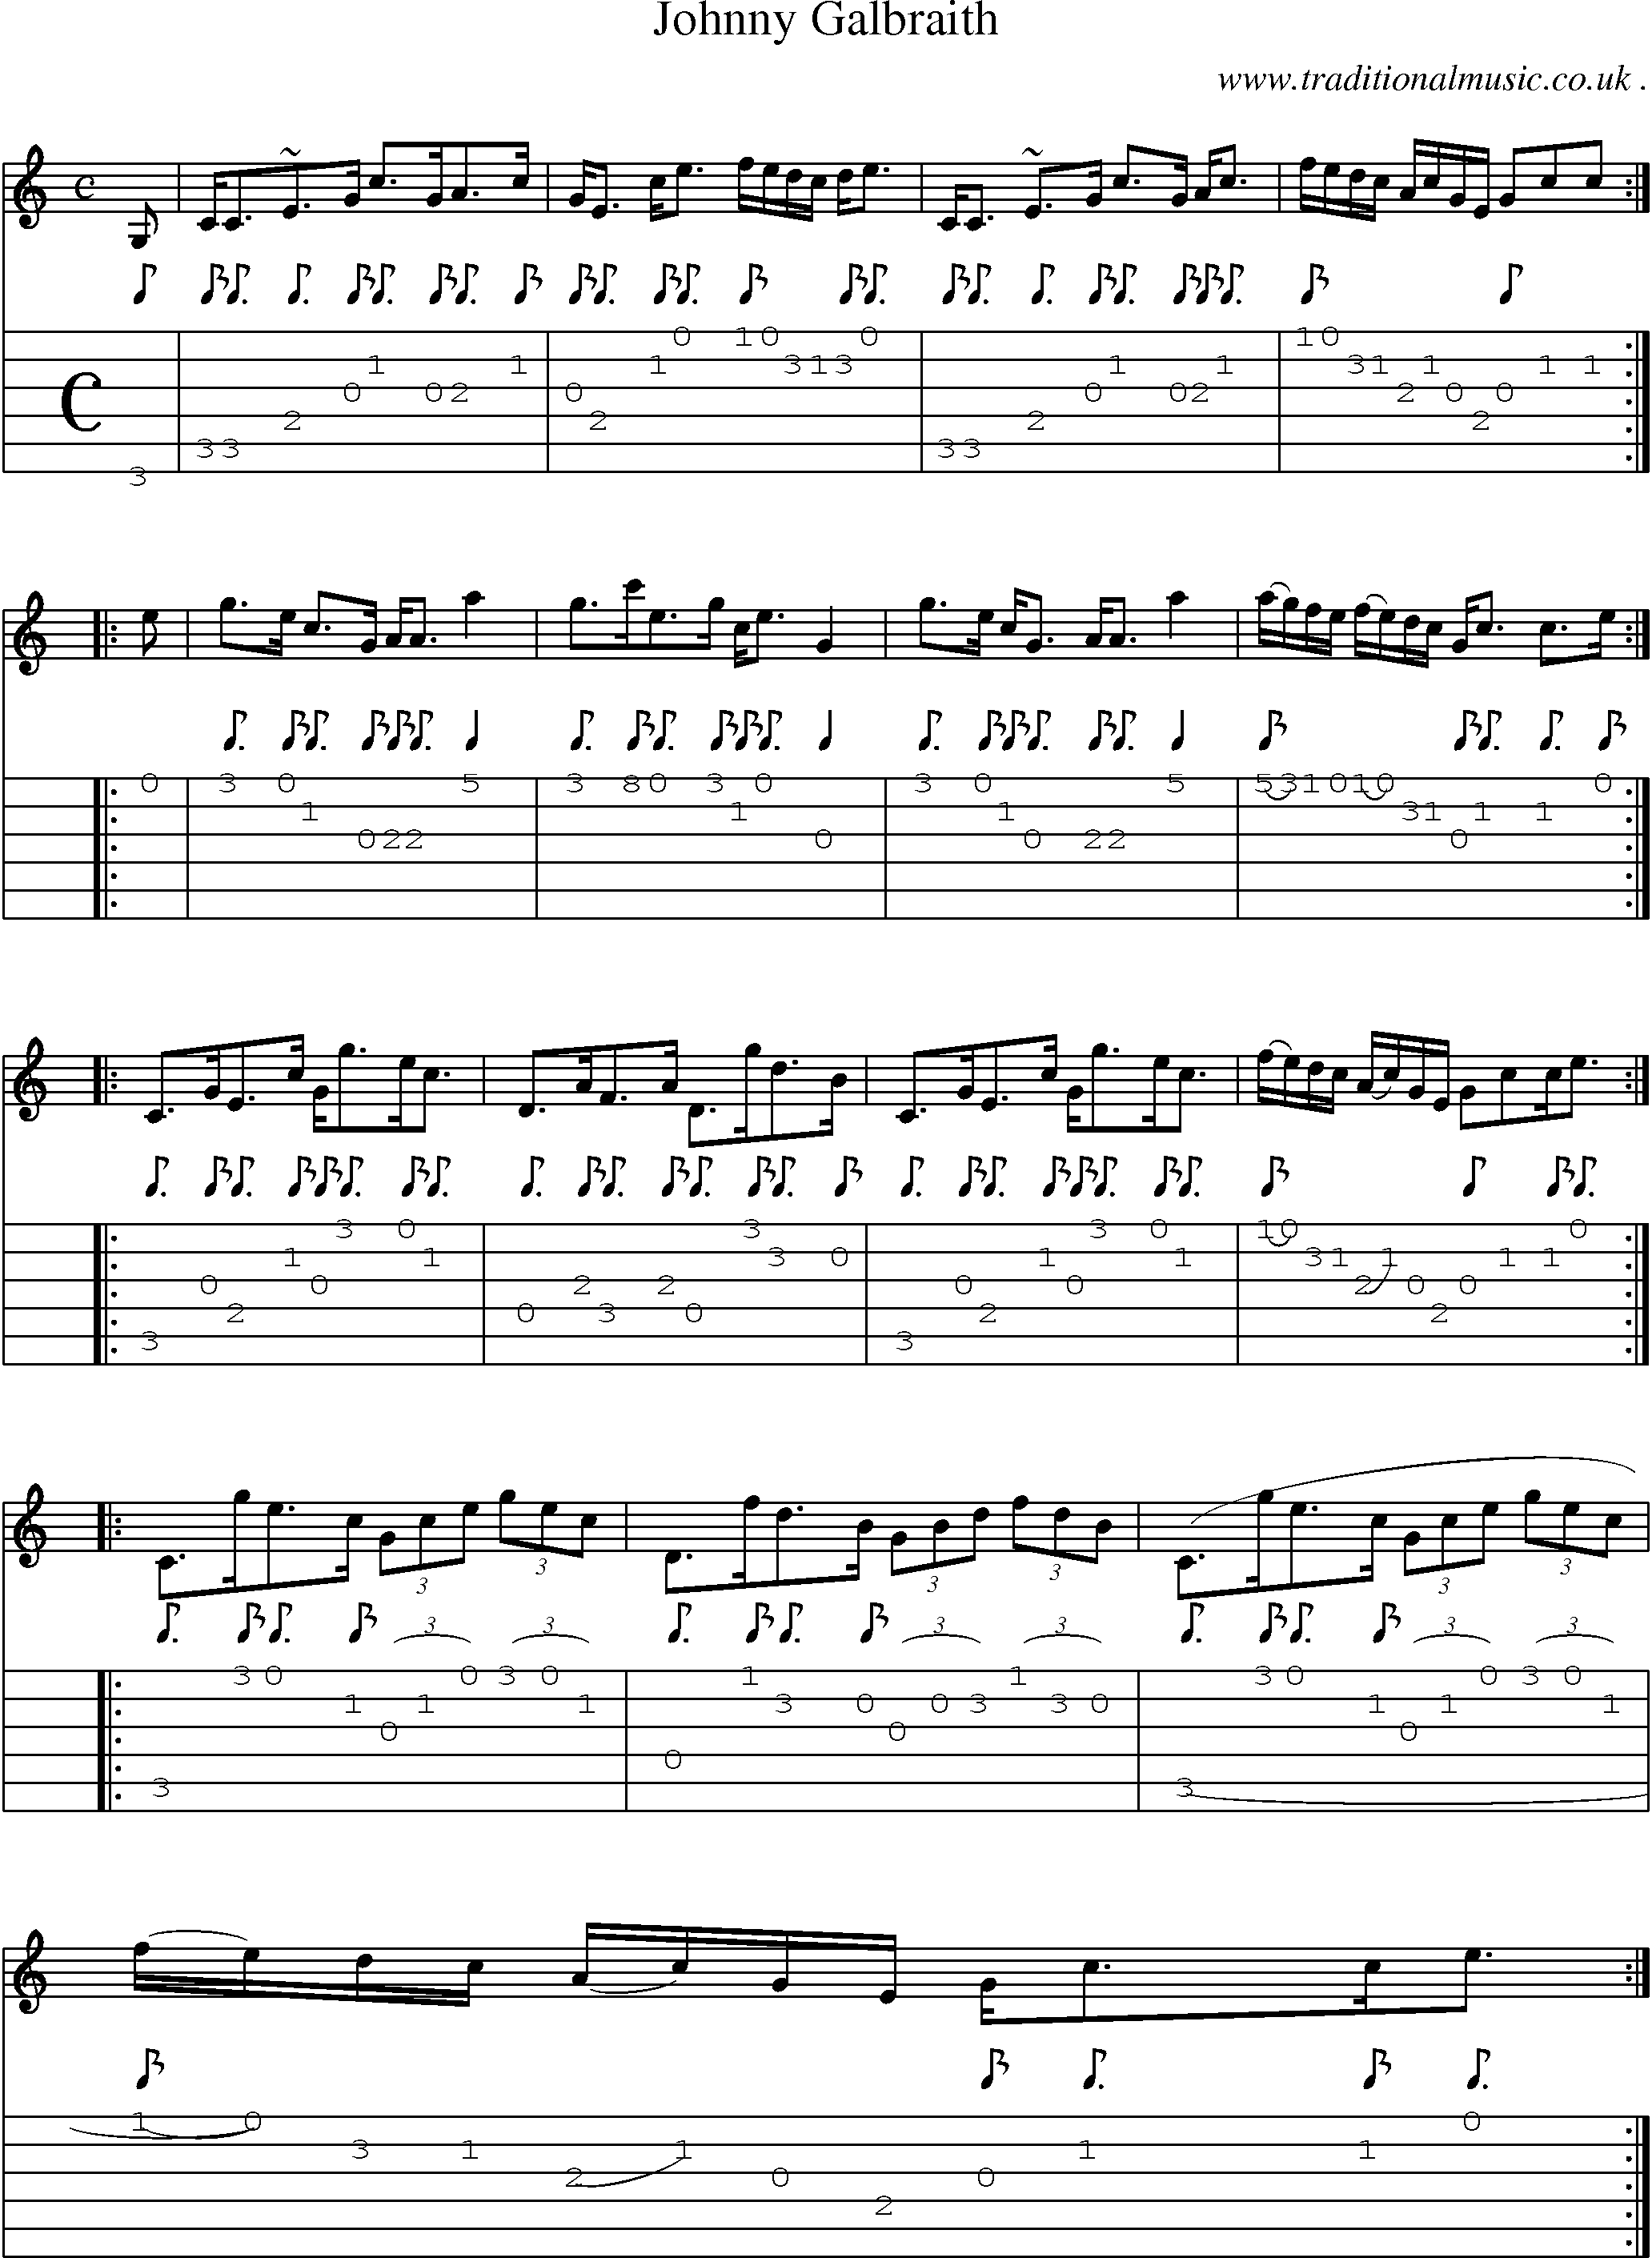 Sheet-music  score, Chords and Guitar Tabs for Johnny Galbraith